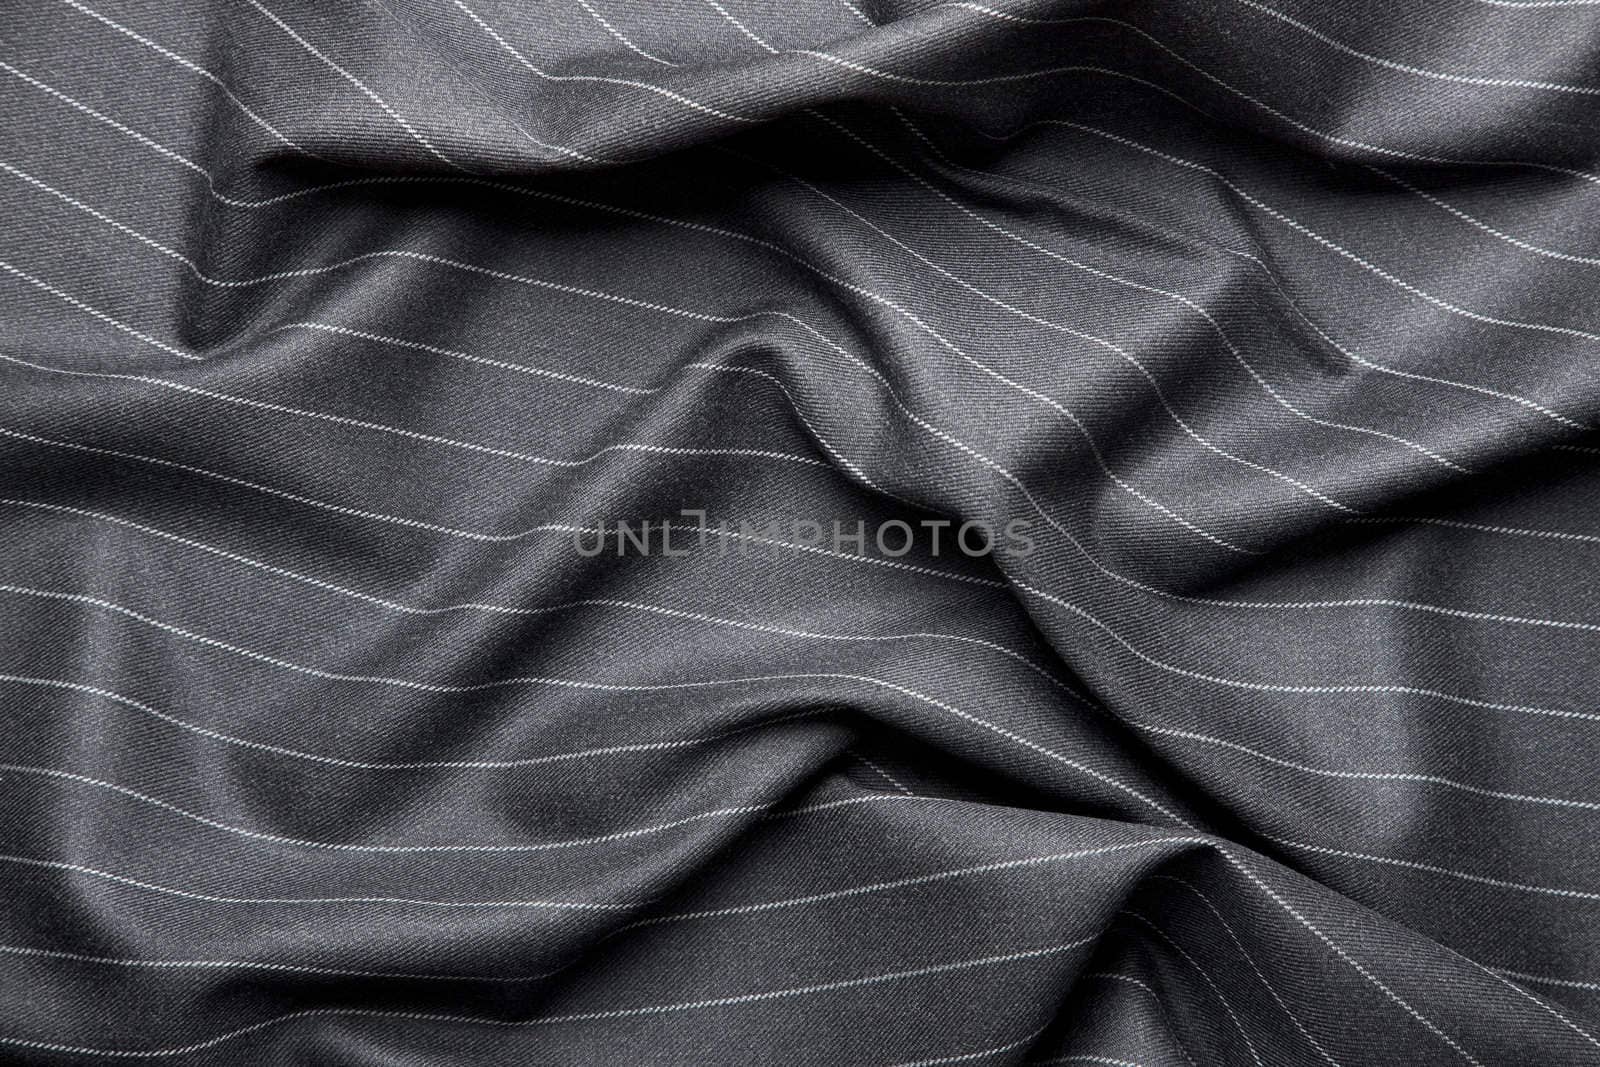 High quality pin stripe suit background texture with folds